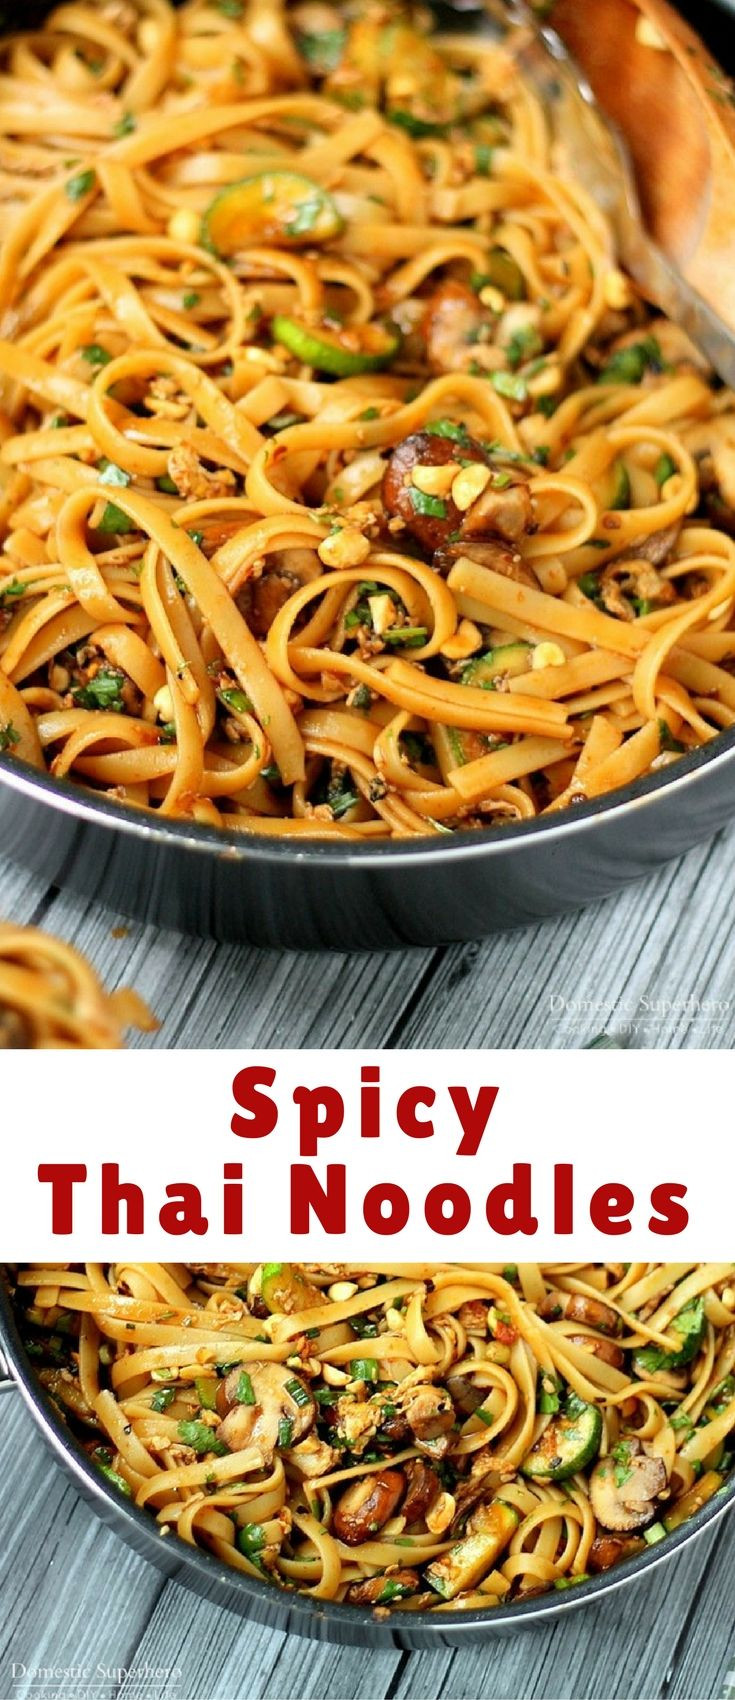 One Pot Spicy Thai Noodles
 e Pot Spicy Thai Noodles are SO good and easy to cook up